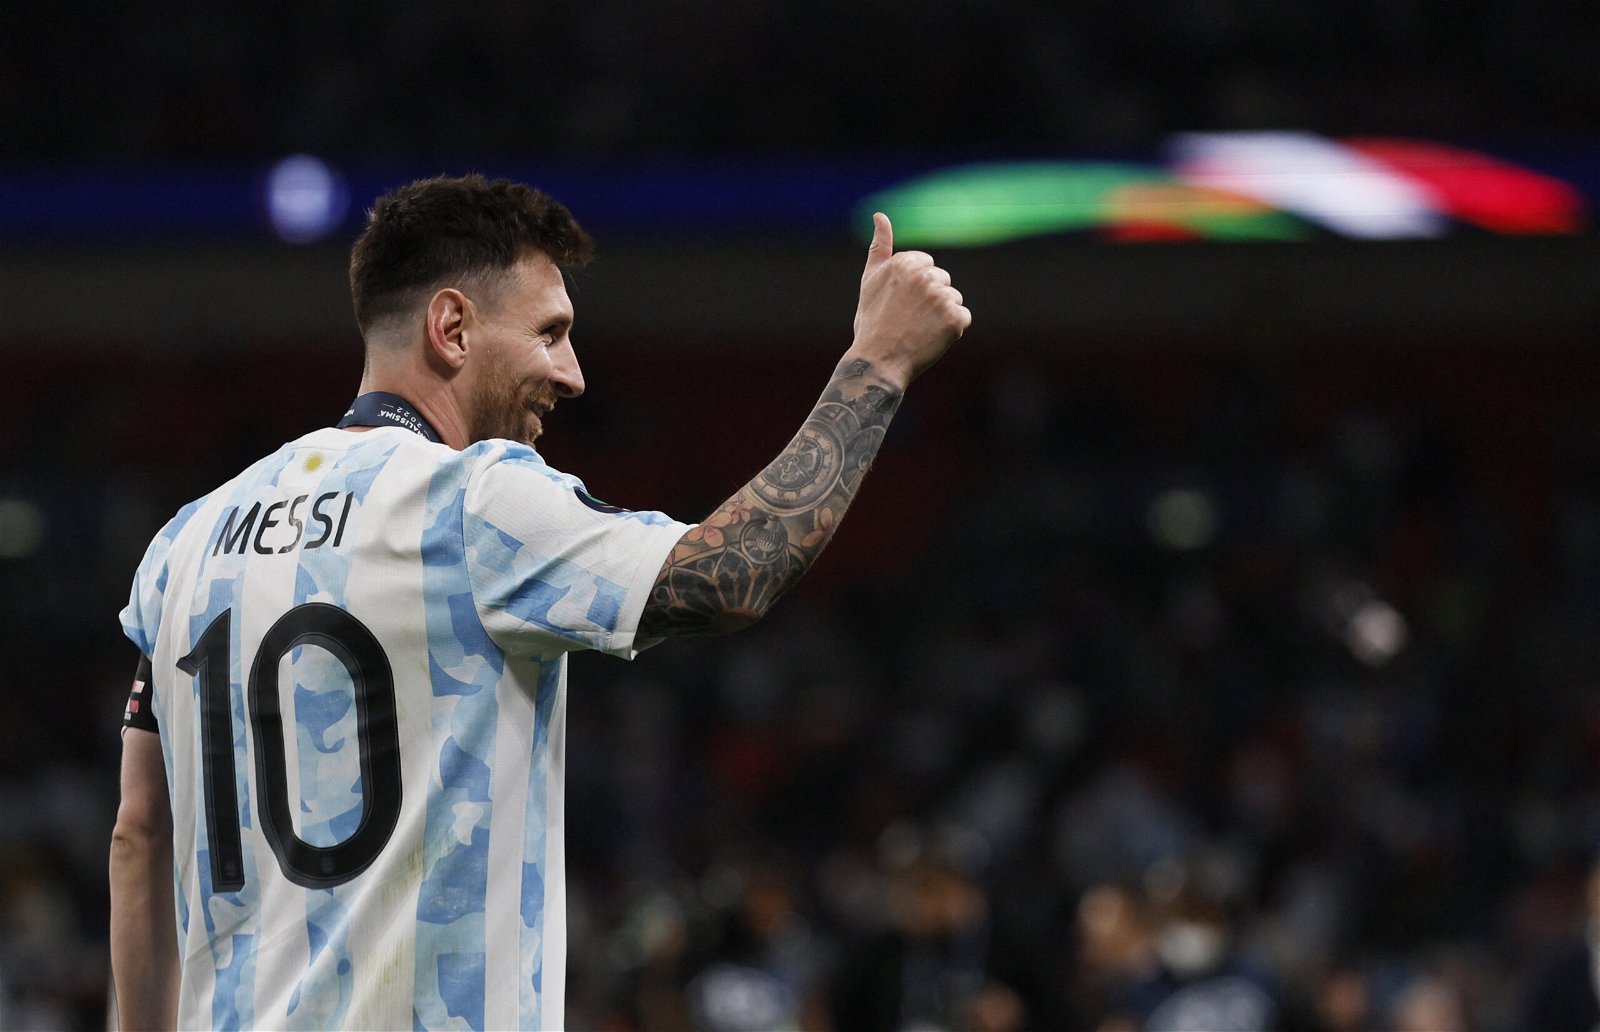 Lionel Messi is one of the top players so far in World Cup